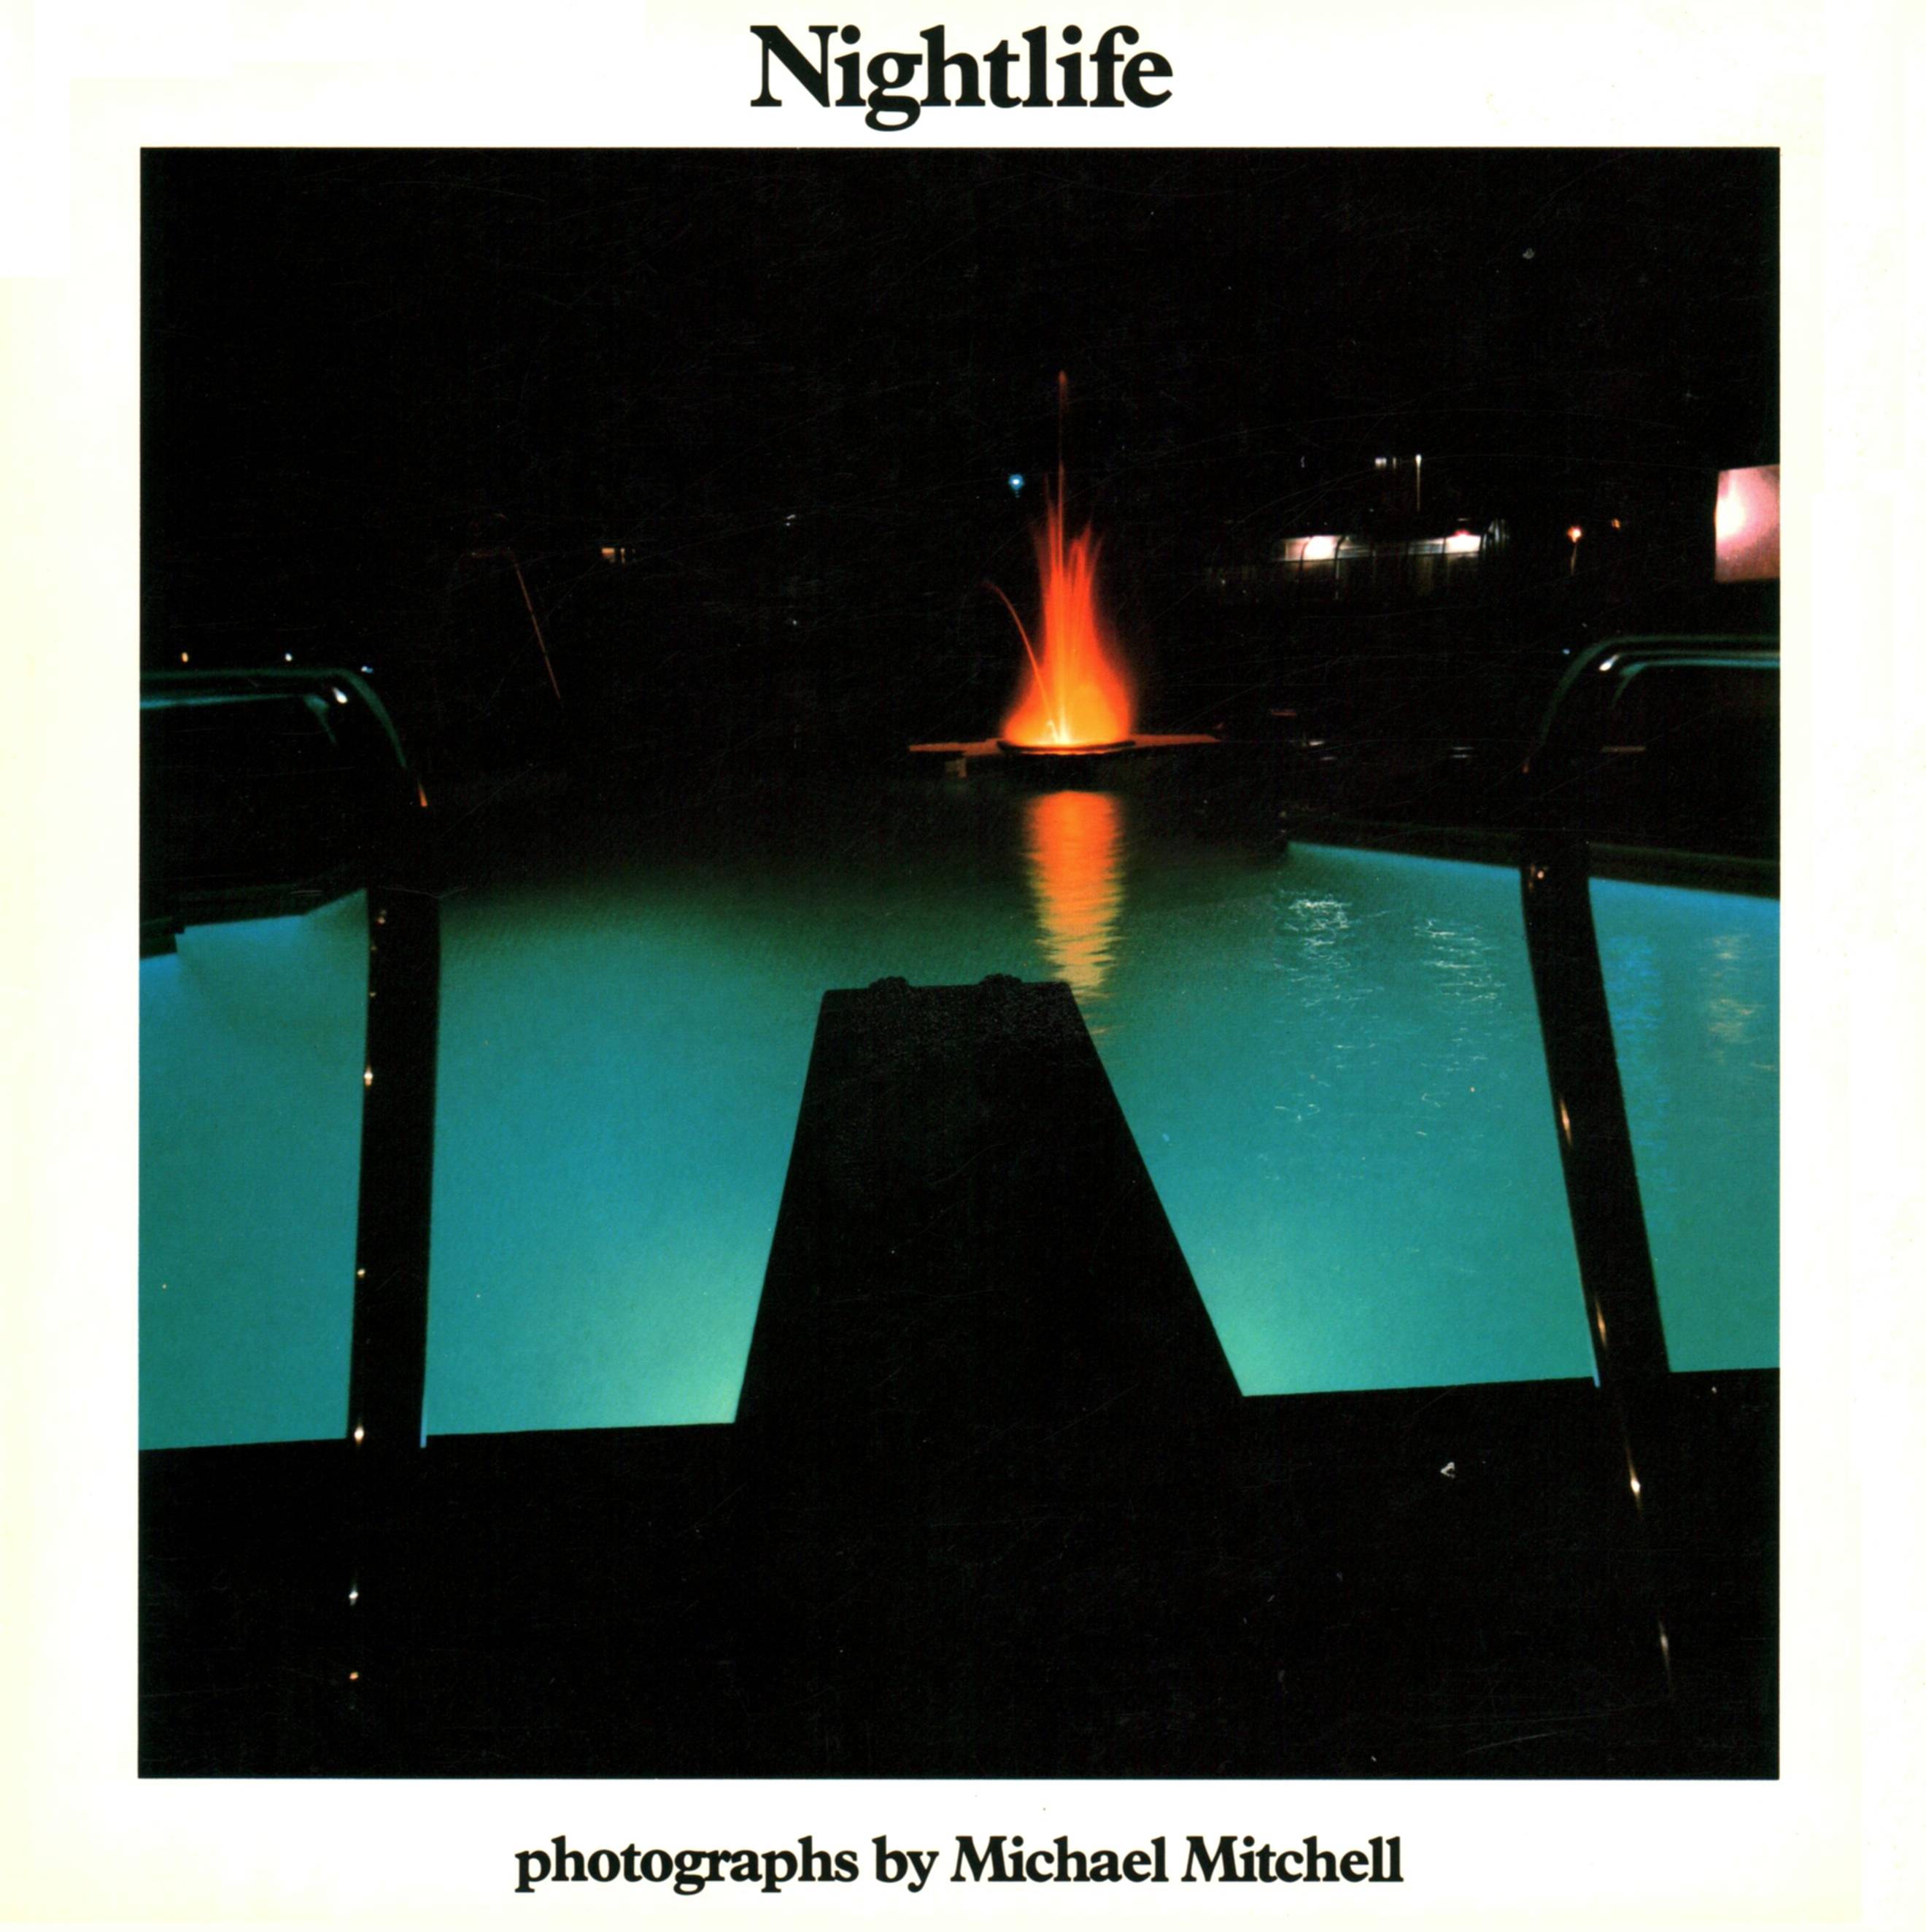 Nightlife. Photographs by Michael Mitchell. Image courtesy of the AGO.